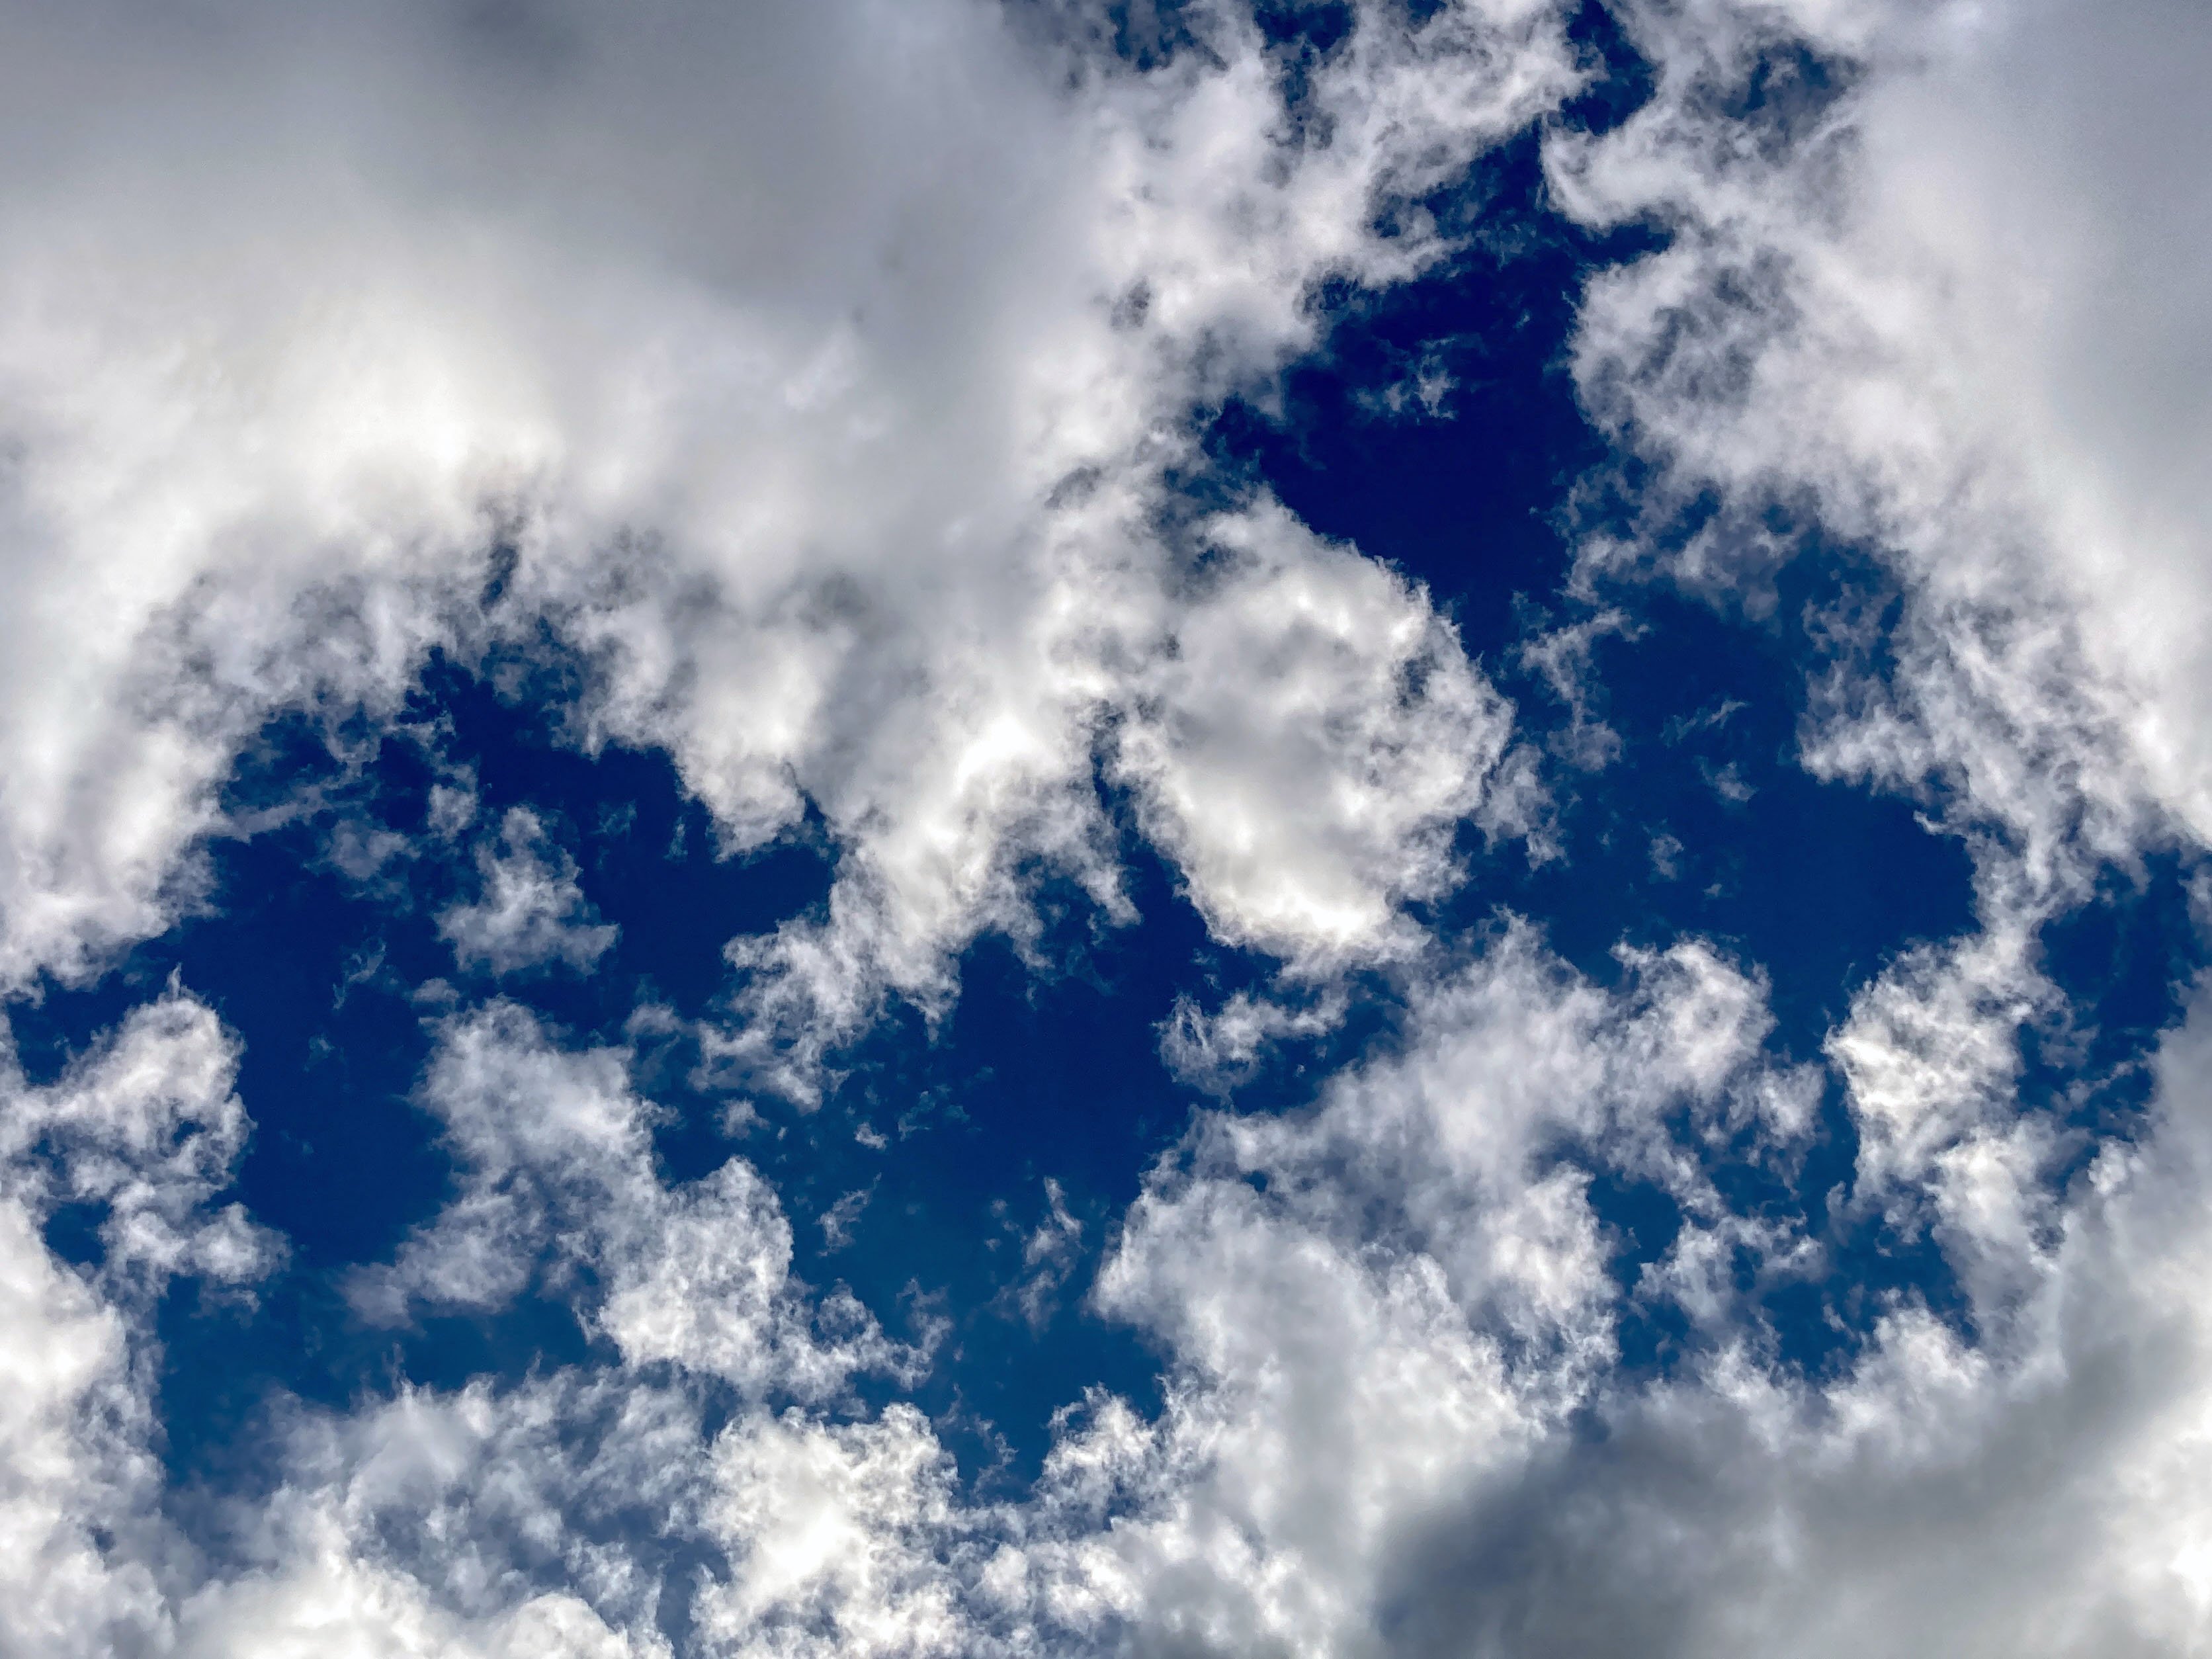 Daily Snap #10: Cloudscape - Whispy white clouds against a deep blue sky.﻿